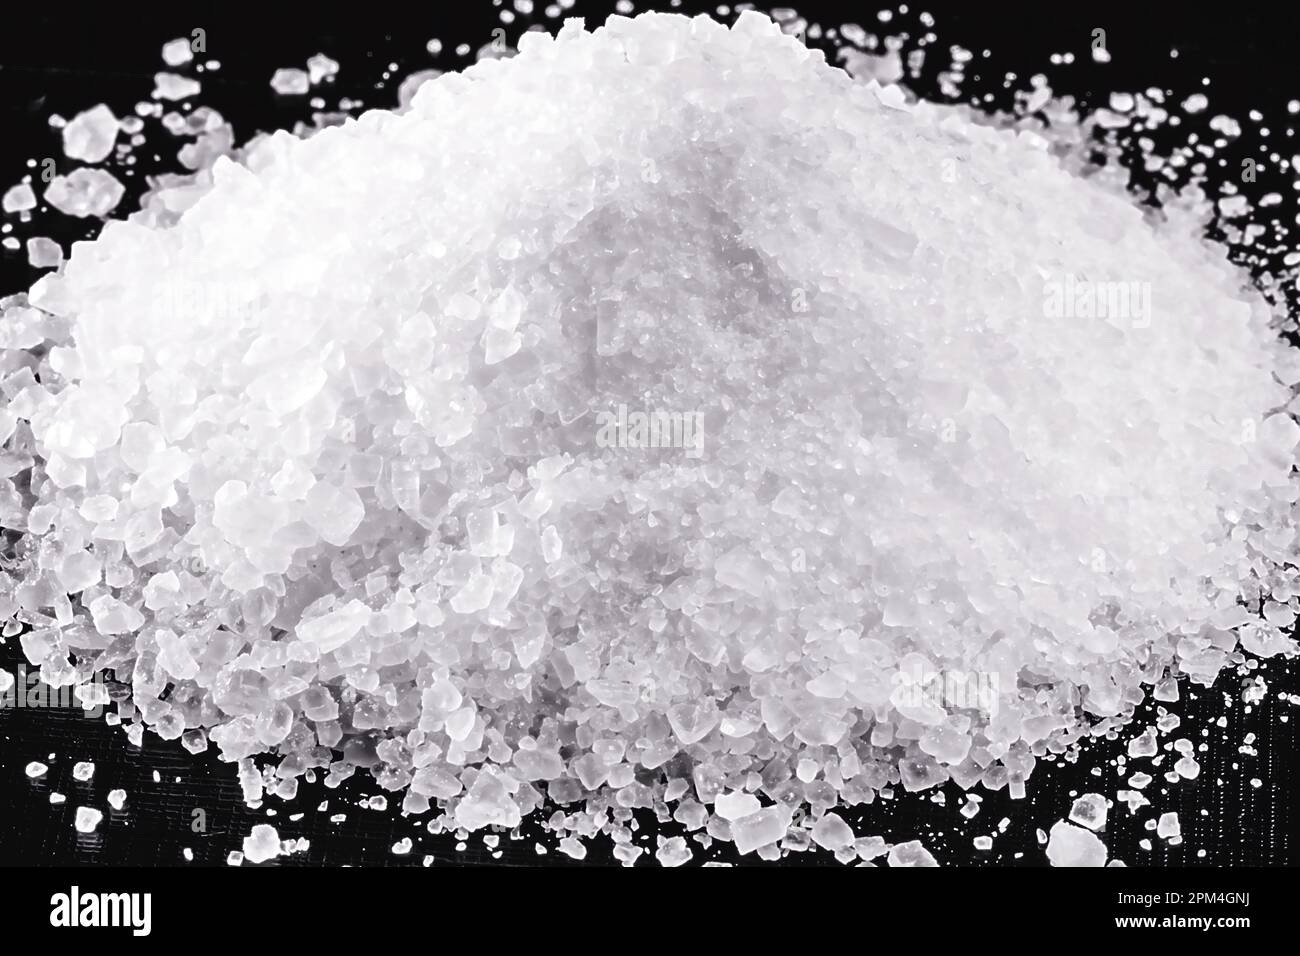 Potassium cyanide or potassium cyanide is a highly toxic chemical compound,  MACRO PHOTOGRAPHY Stock Photo - Alamy